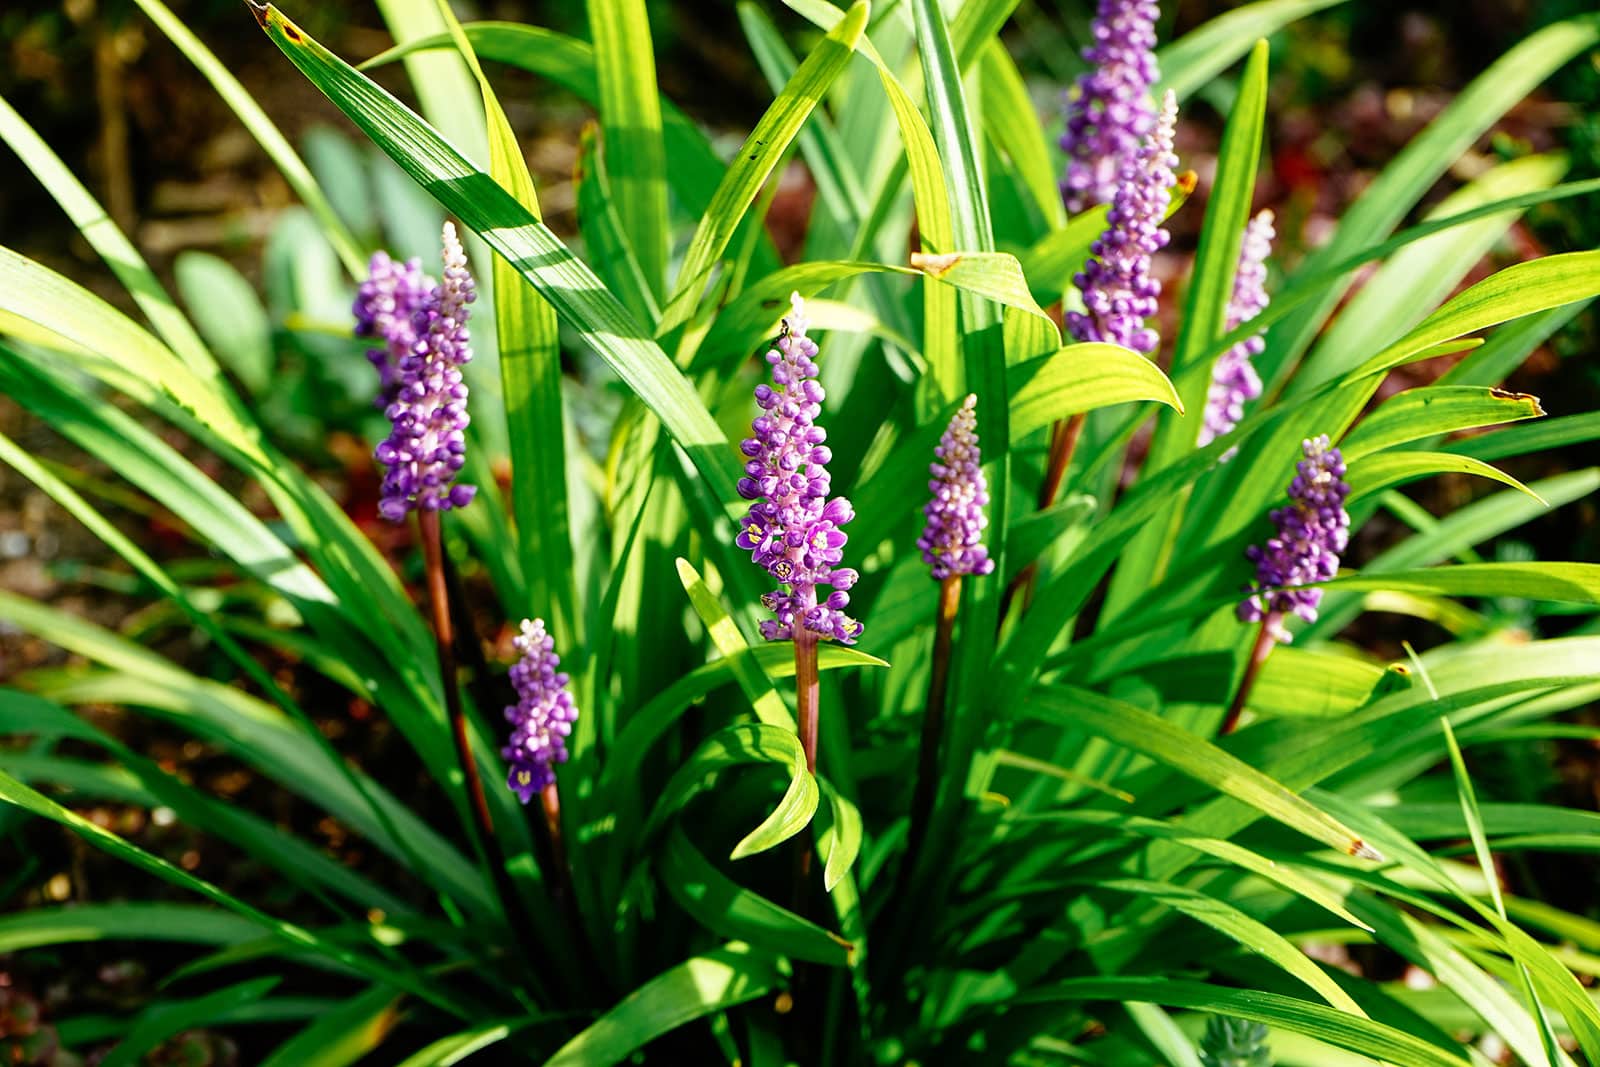 Common lilyturf with purple flower spikes